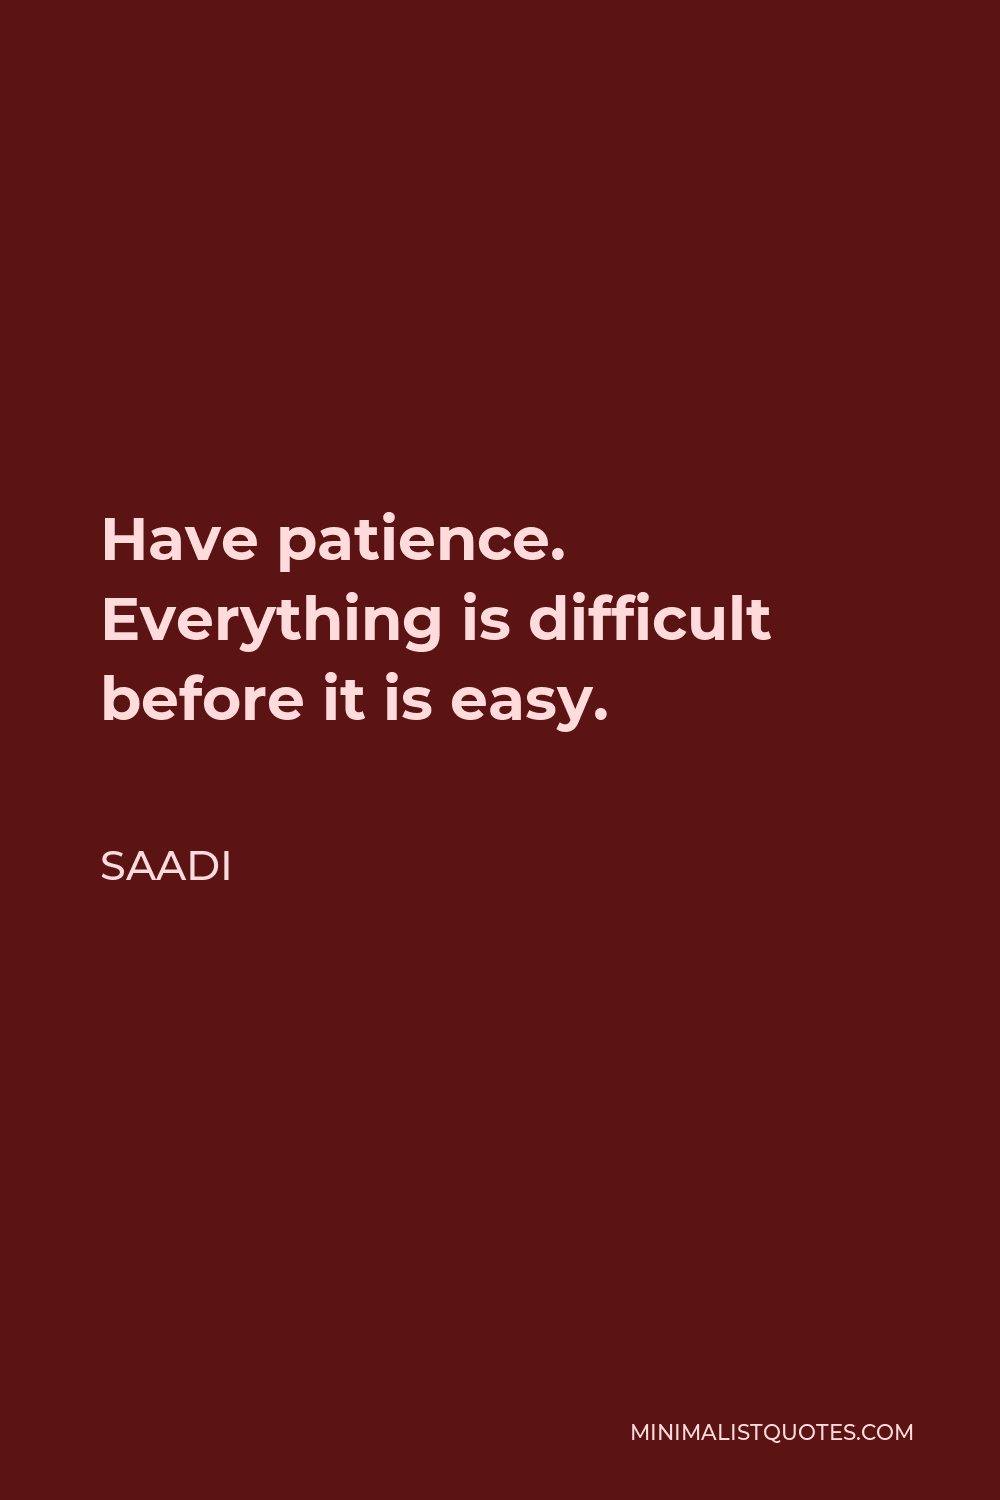 Saadi Quote - Have patience. Everything is difficult before it is easy.